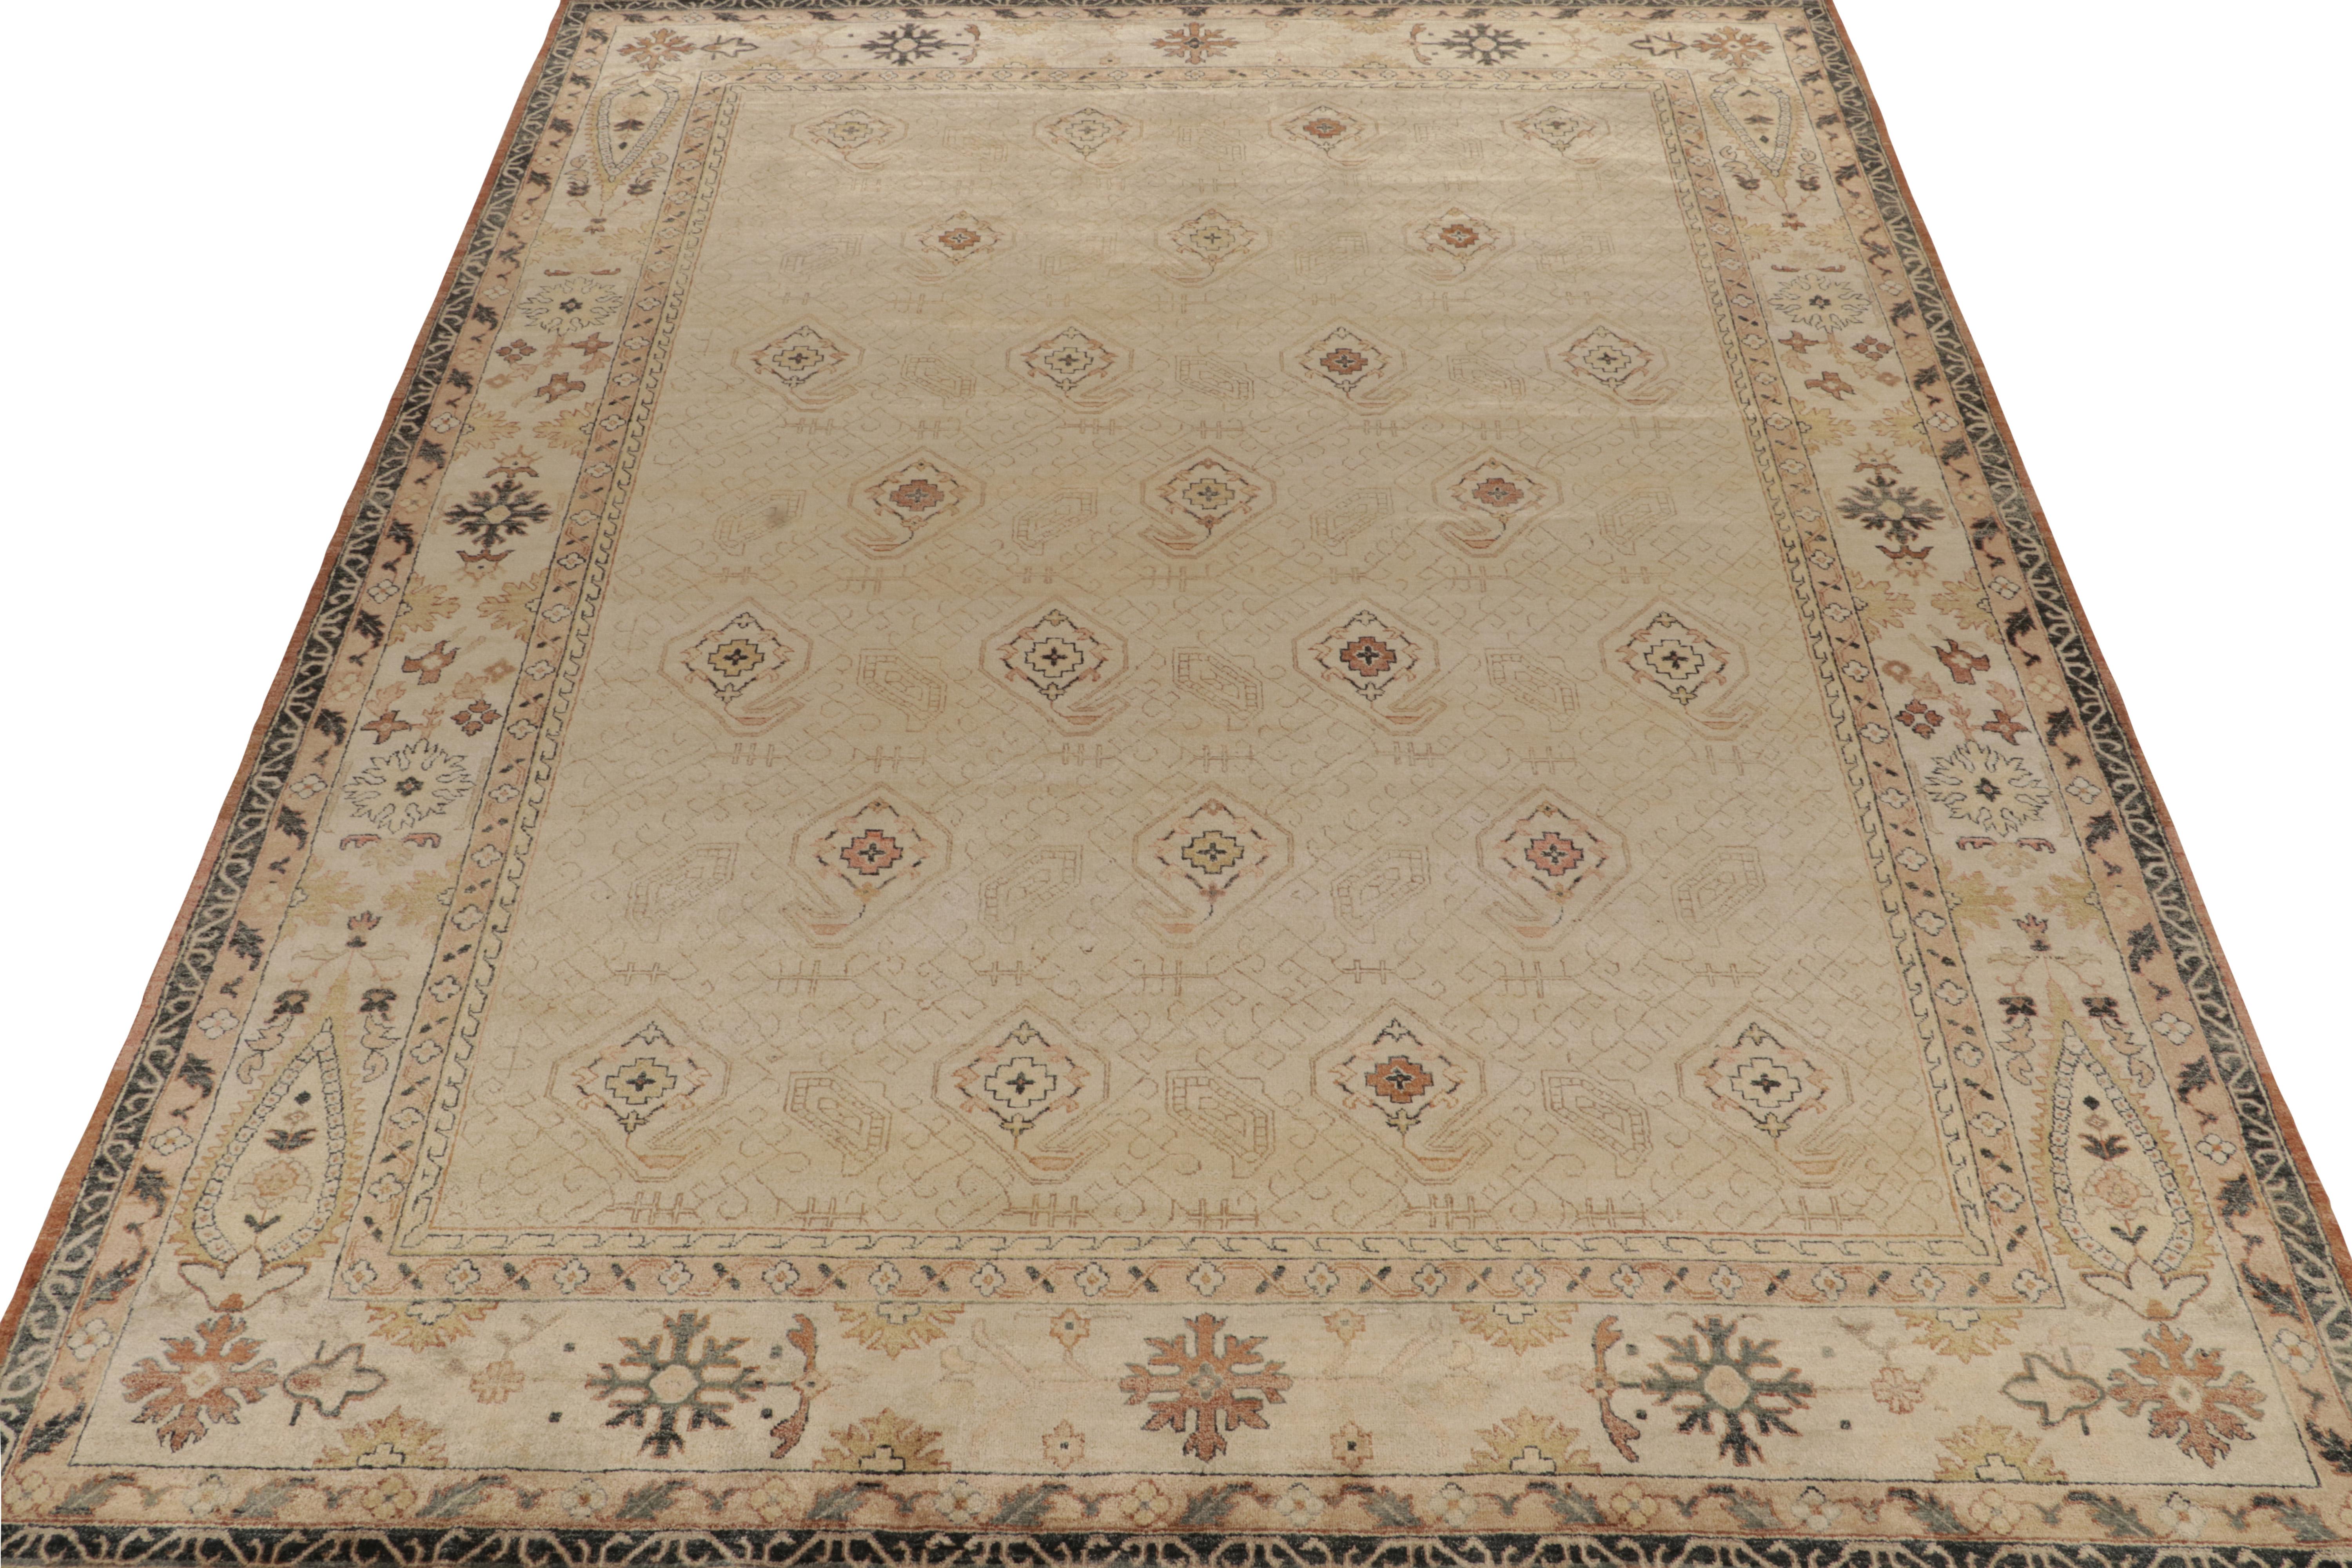 Indian Rug & Kilim’s Classic style rug in Beige-Brown Paisleys, Rustic Florals For Sale